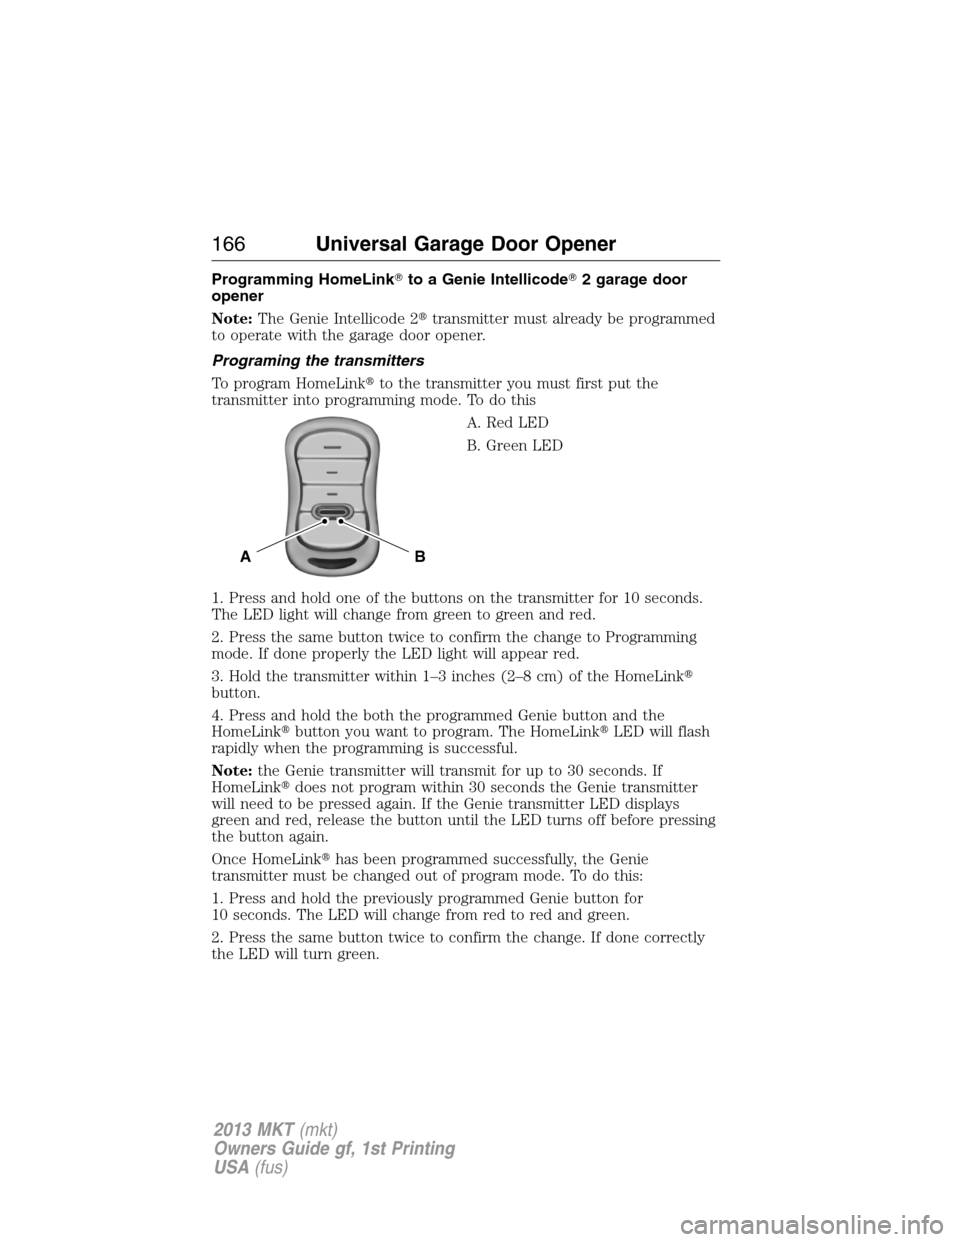 LINCOLN MKT 2013  Owners Manual Programming HomeLinkto a Genie Intellicode2 garage door
opener
Note:The Genie Intellicode 2transmitter must already be programmed
to operate with the garage door opener.
Programing the transmitters